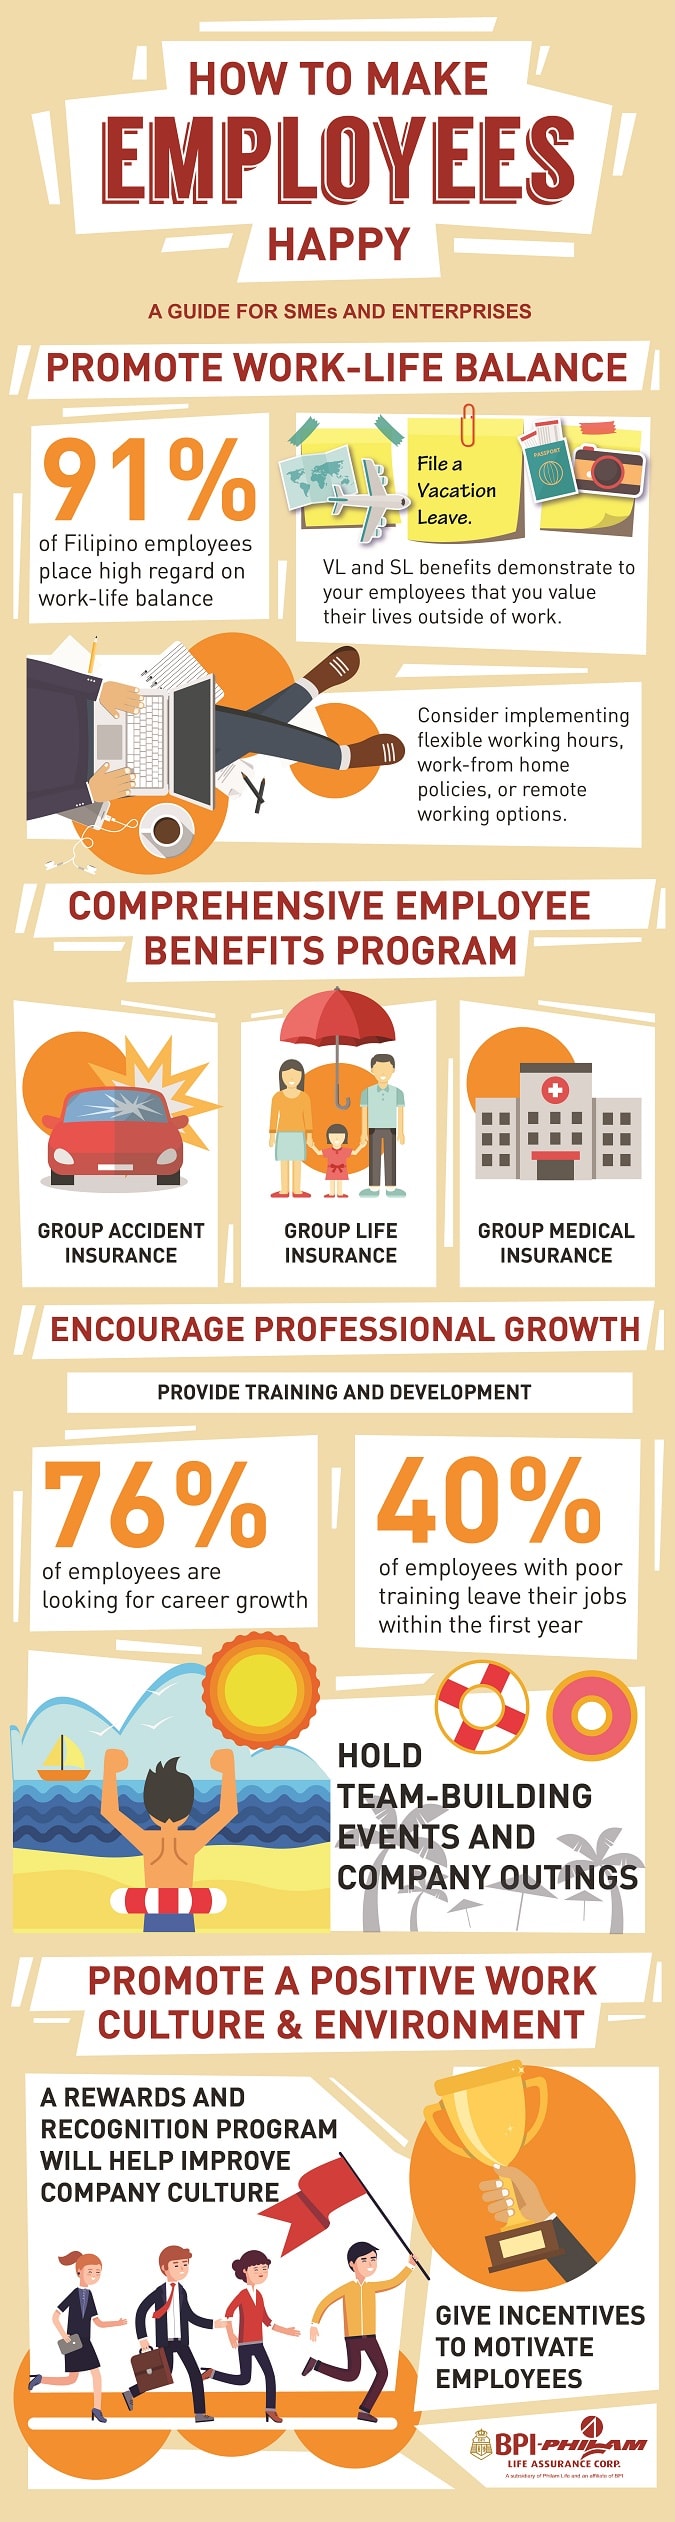 How to Make Employees Happy [Infographic]